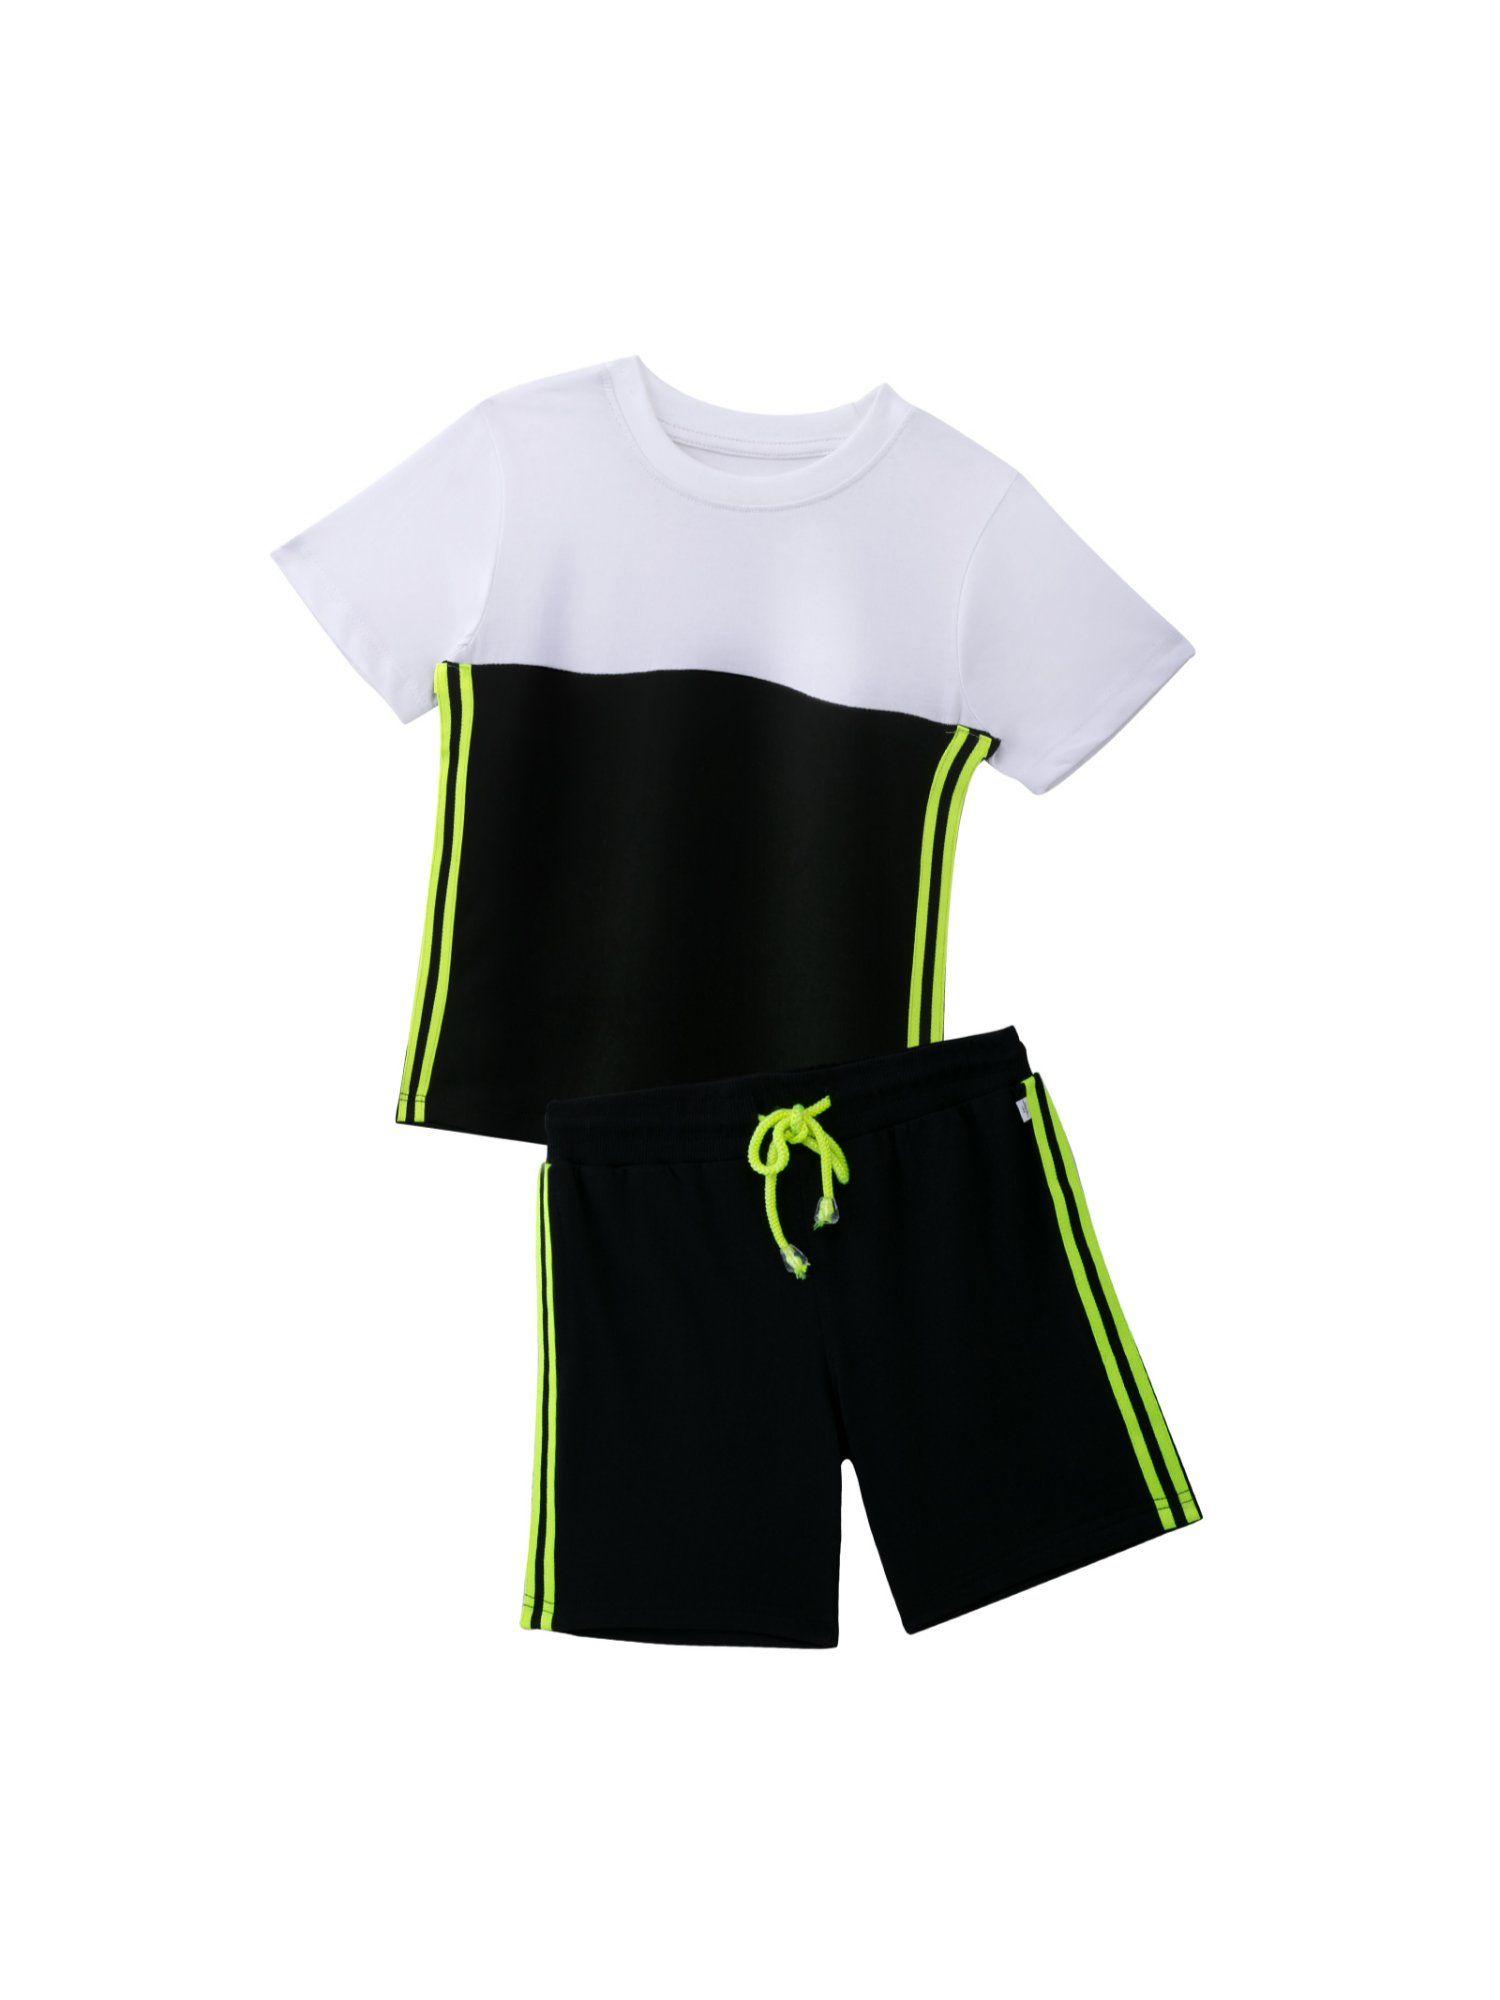 downtown - boy t-shirt and shorts coord (set of 2)